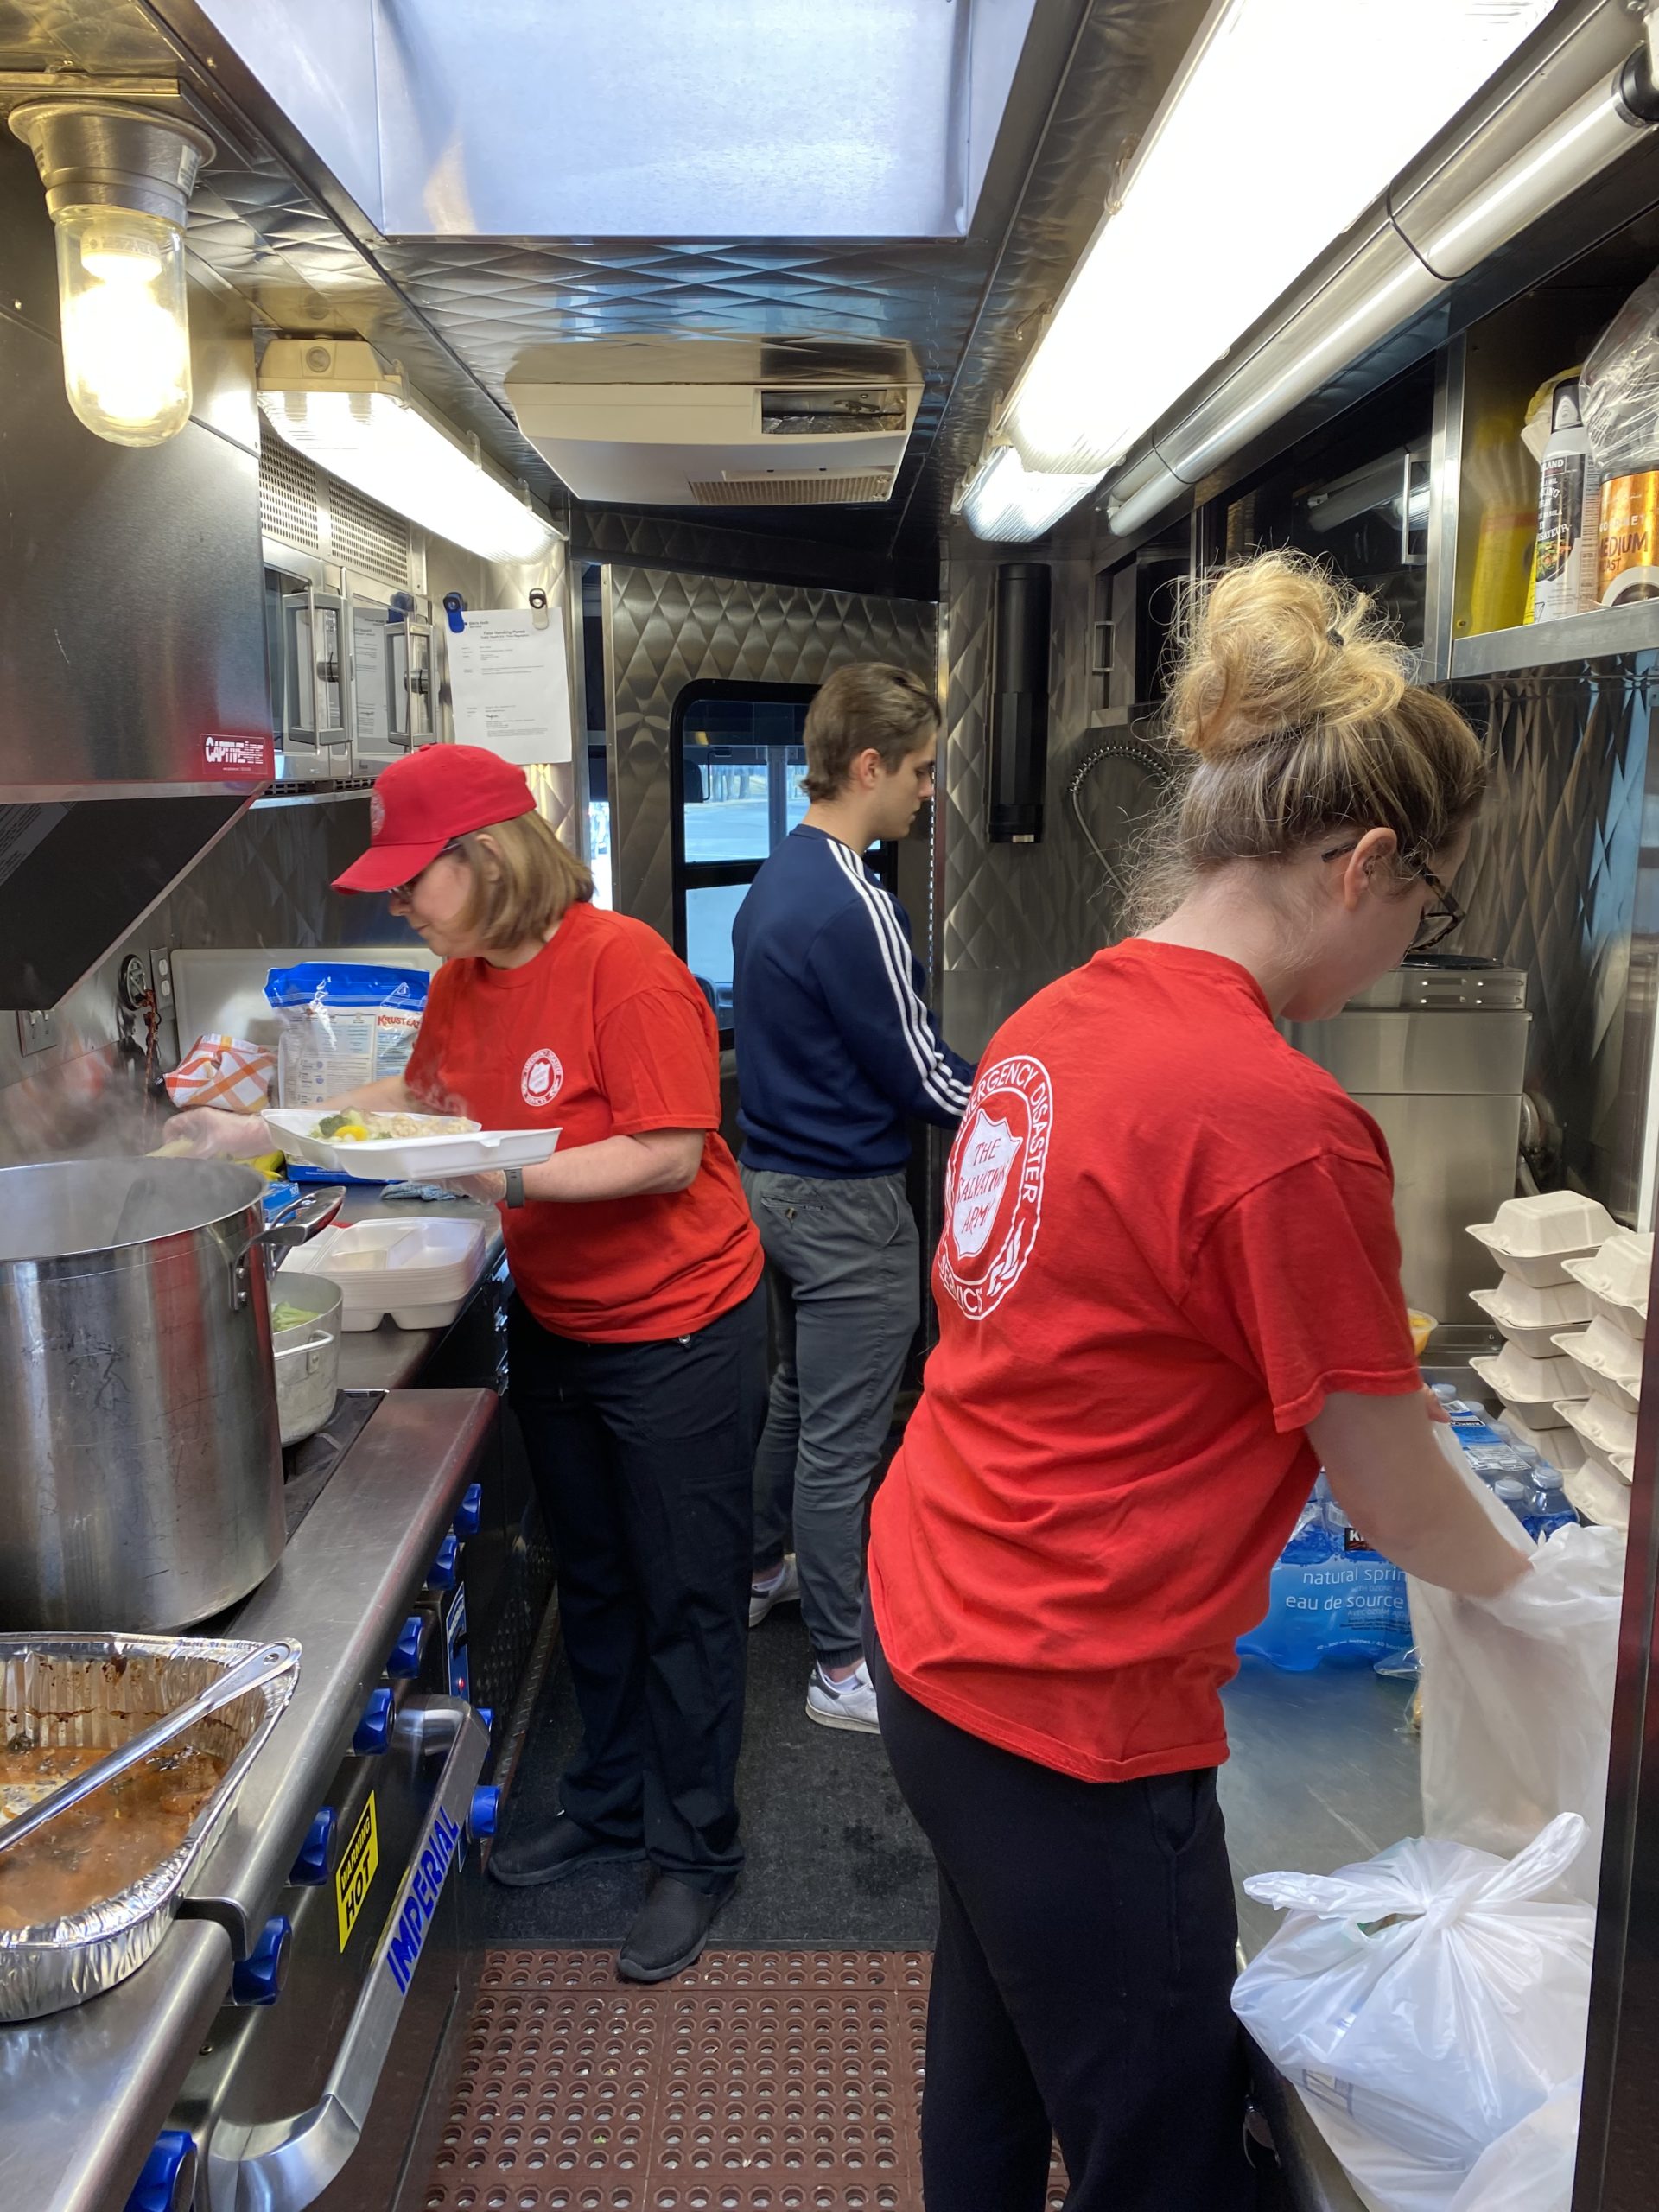 Lethbridge Salvation Army feeding people in isolation during COVID-19